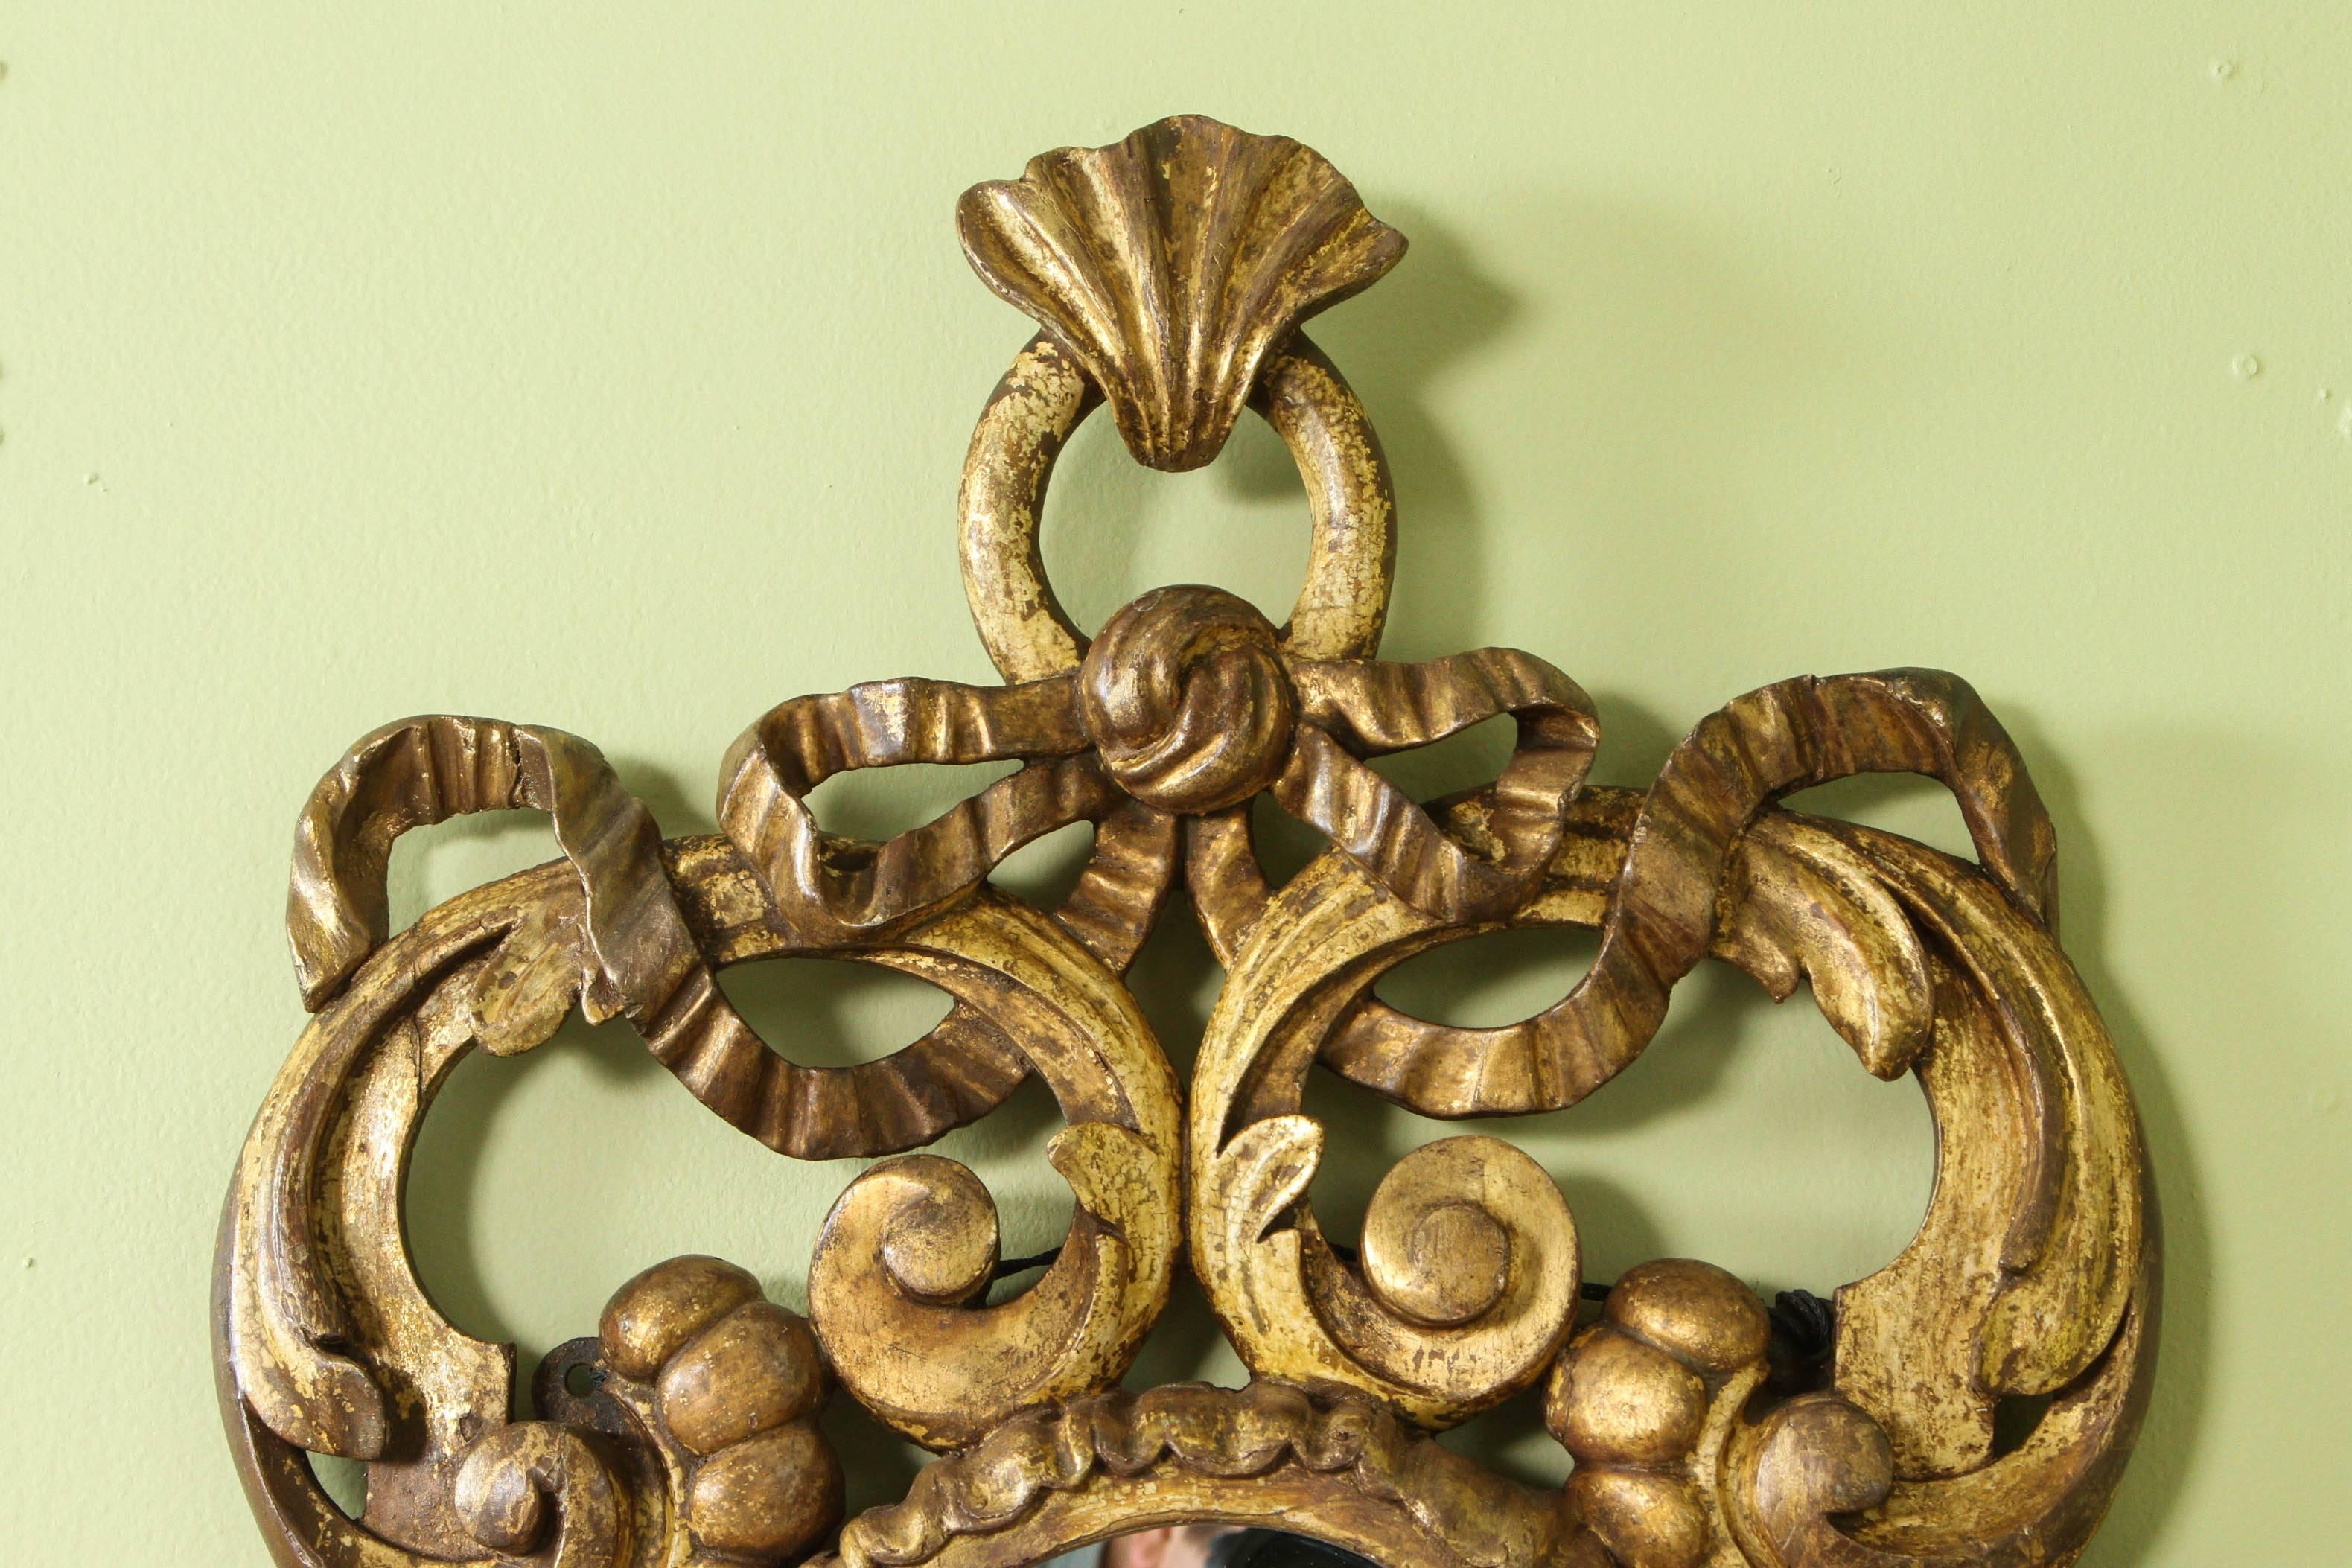 A beautiful elaborately carved French gilt mirror, circa 1800 in the style of Rococo.